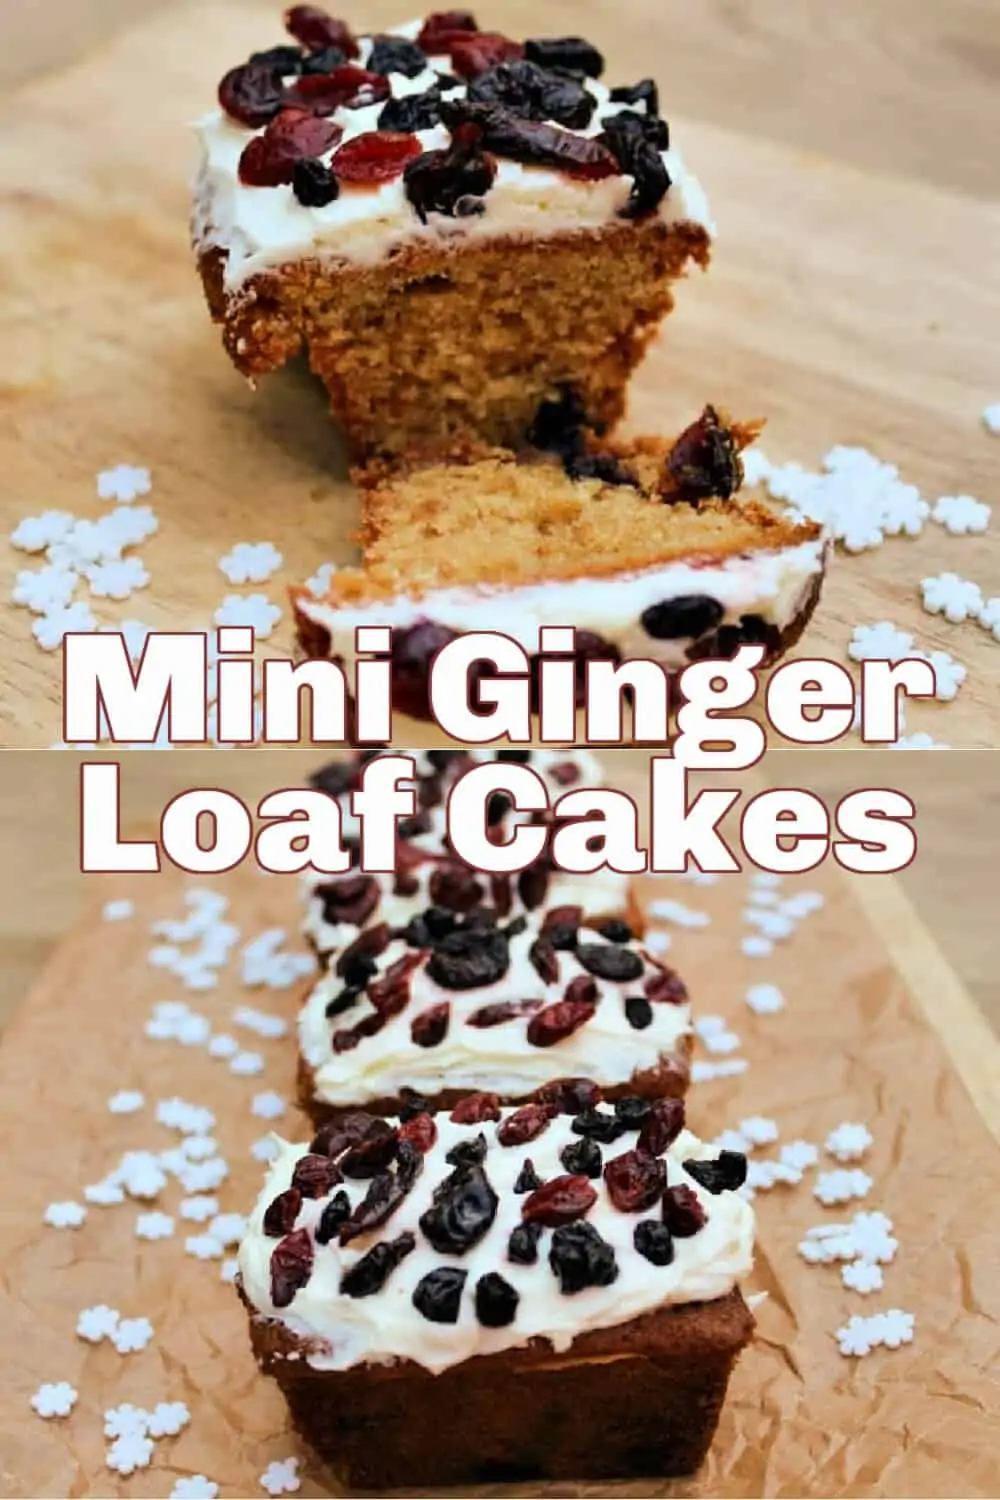 Ginger loaf cake image with text overlay for Pinterest.